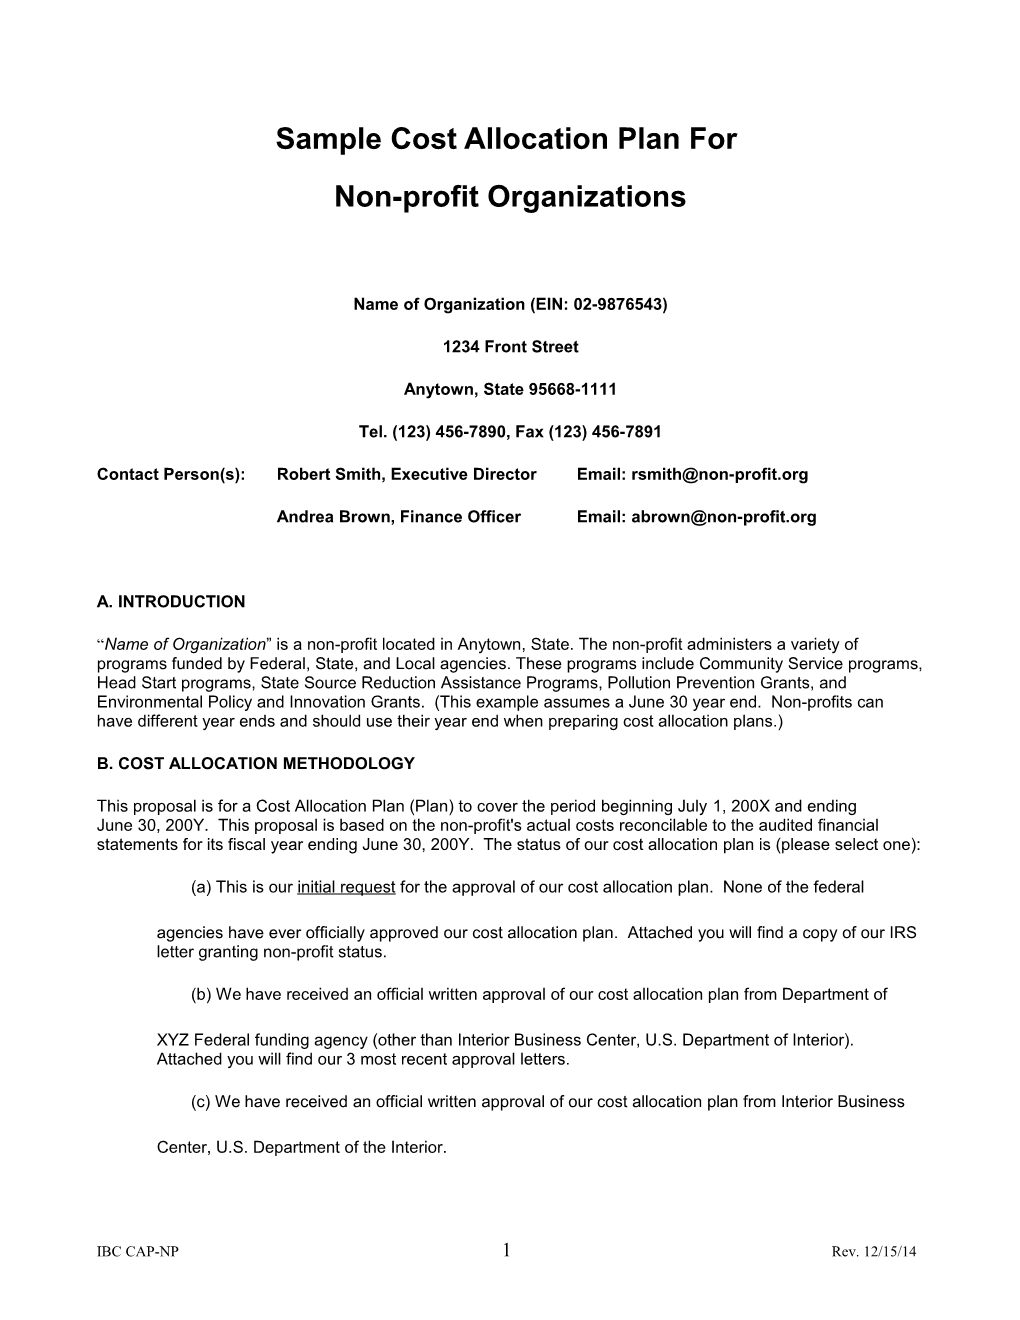 Sample Indirect Cost Proposal Format for Nonprofit Organizations